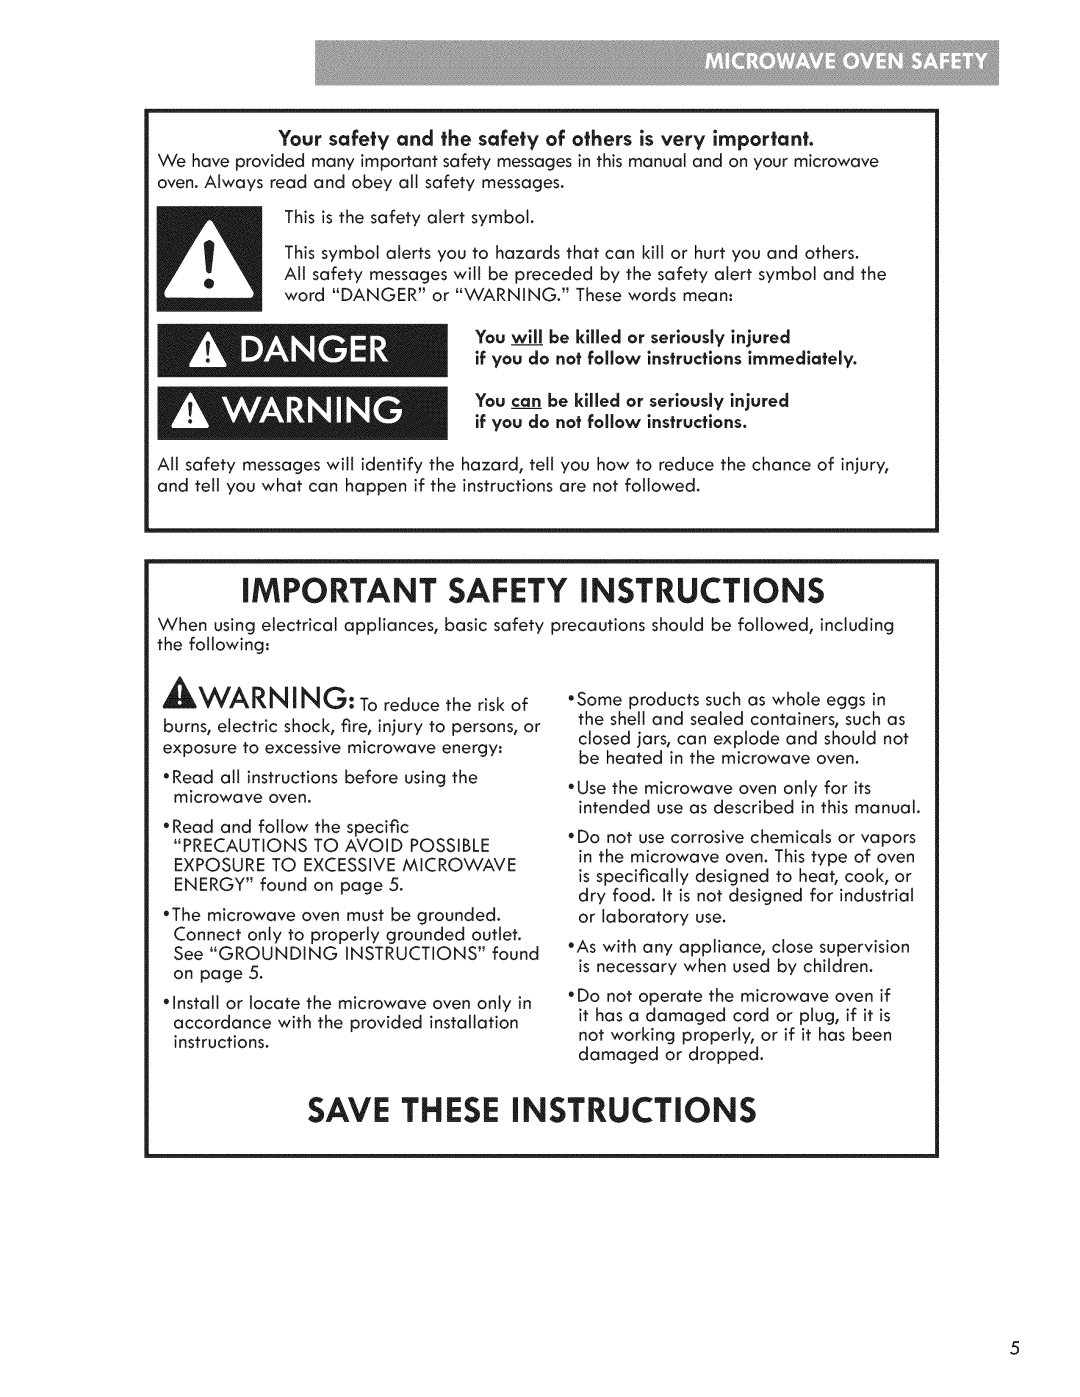 Kenmore 721.7915 manual iMPORTANT SAFETY iNSTRUCTiONS, Save These Instructions, You will be kllled or serlously injured 